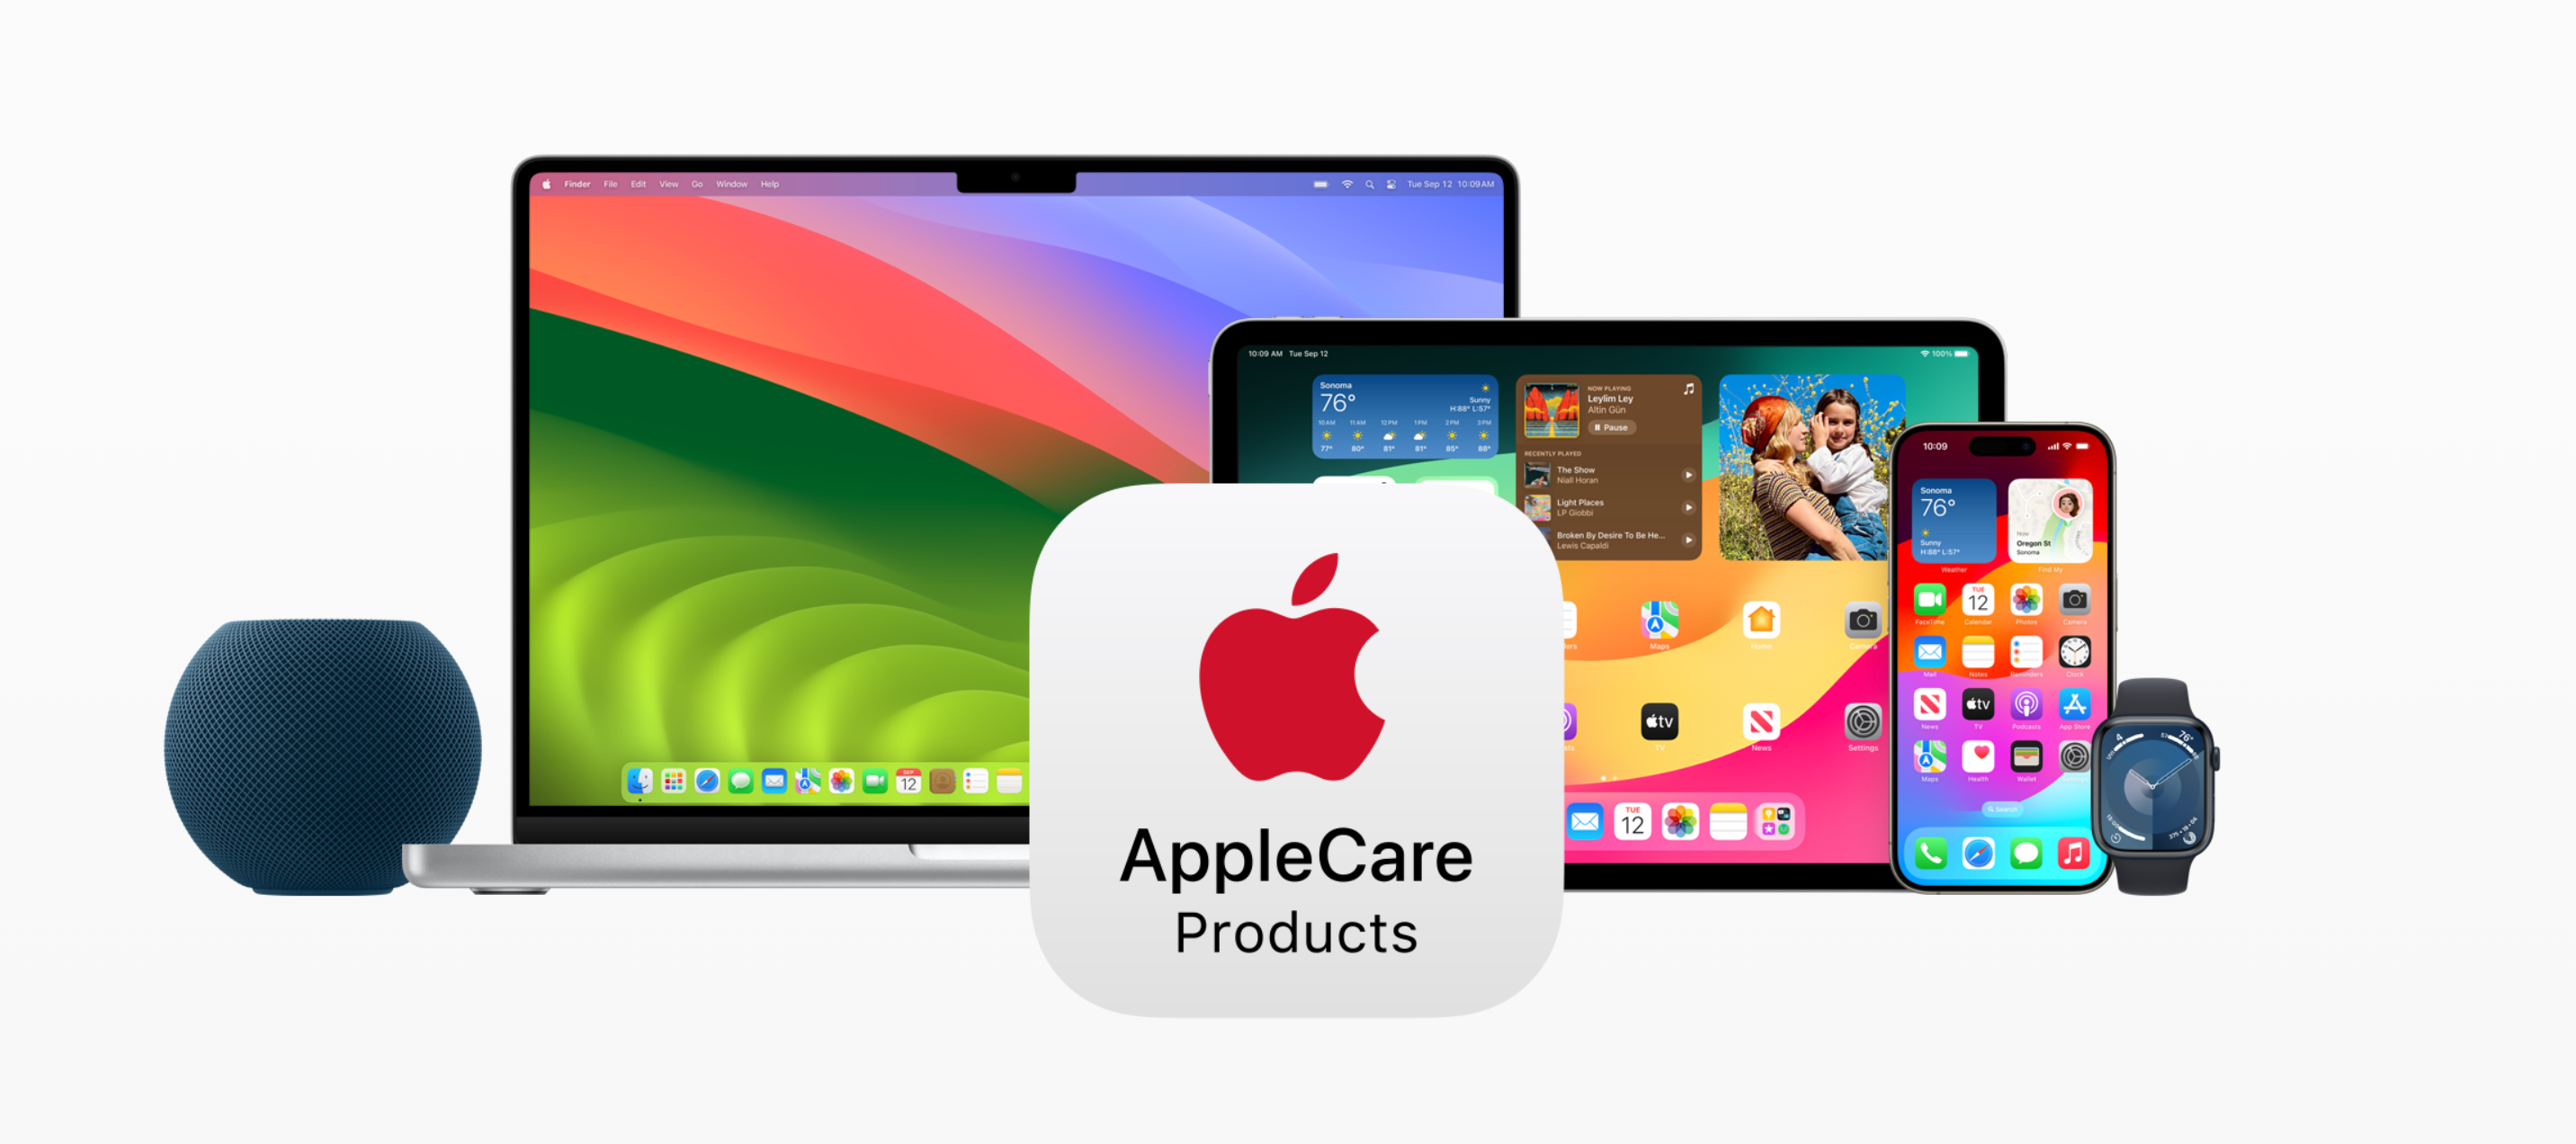 An Apple ad showing the range of AppleCare-enabled products, including HomePod, Mac, iPad, Apple Watch and iPhone